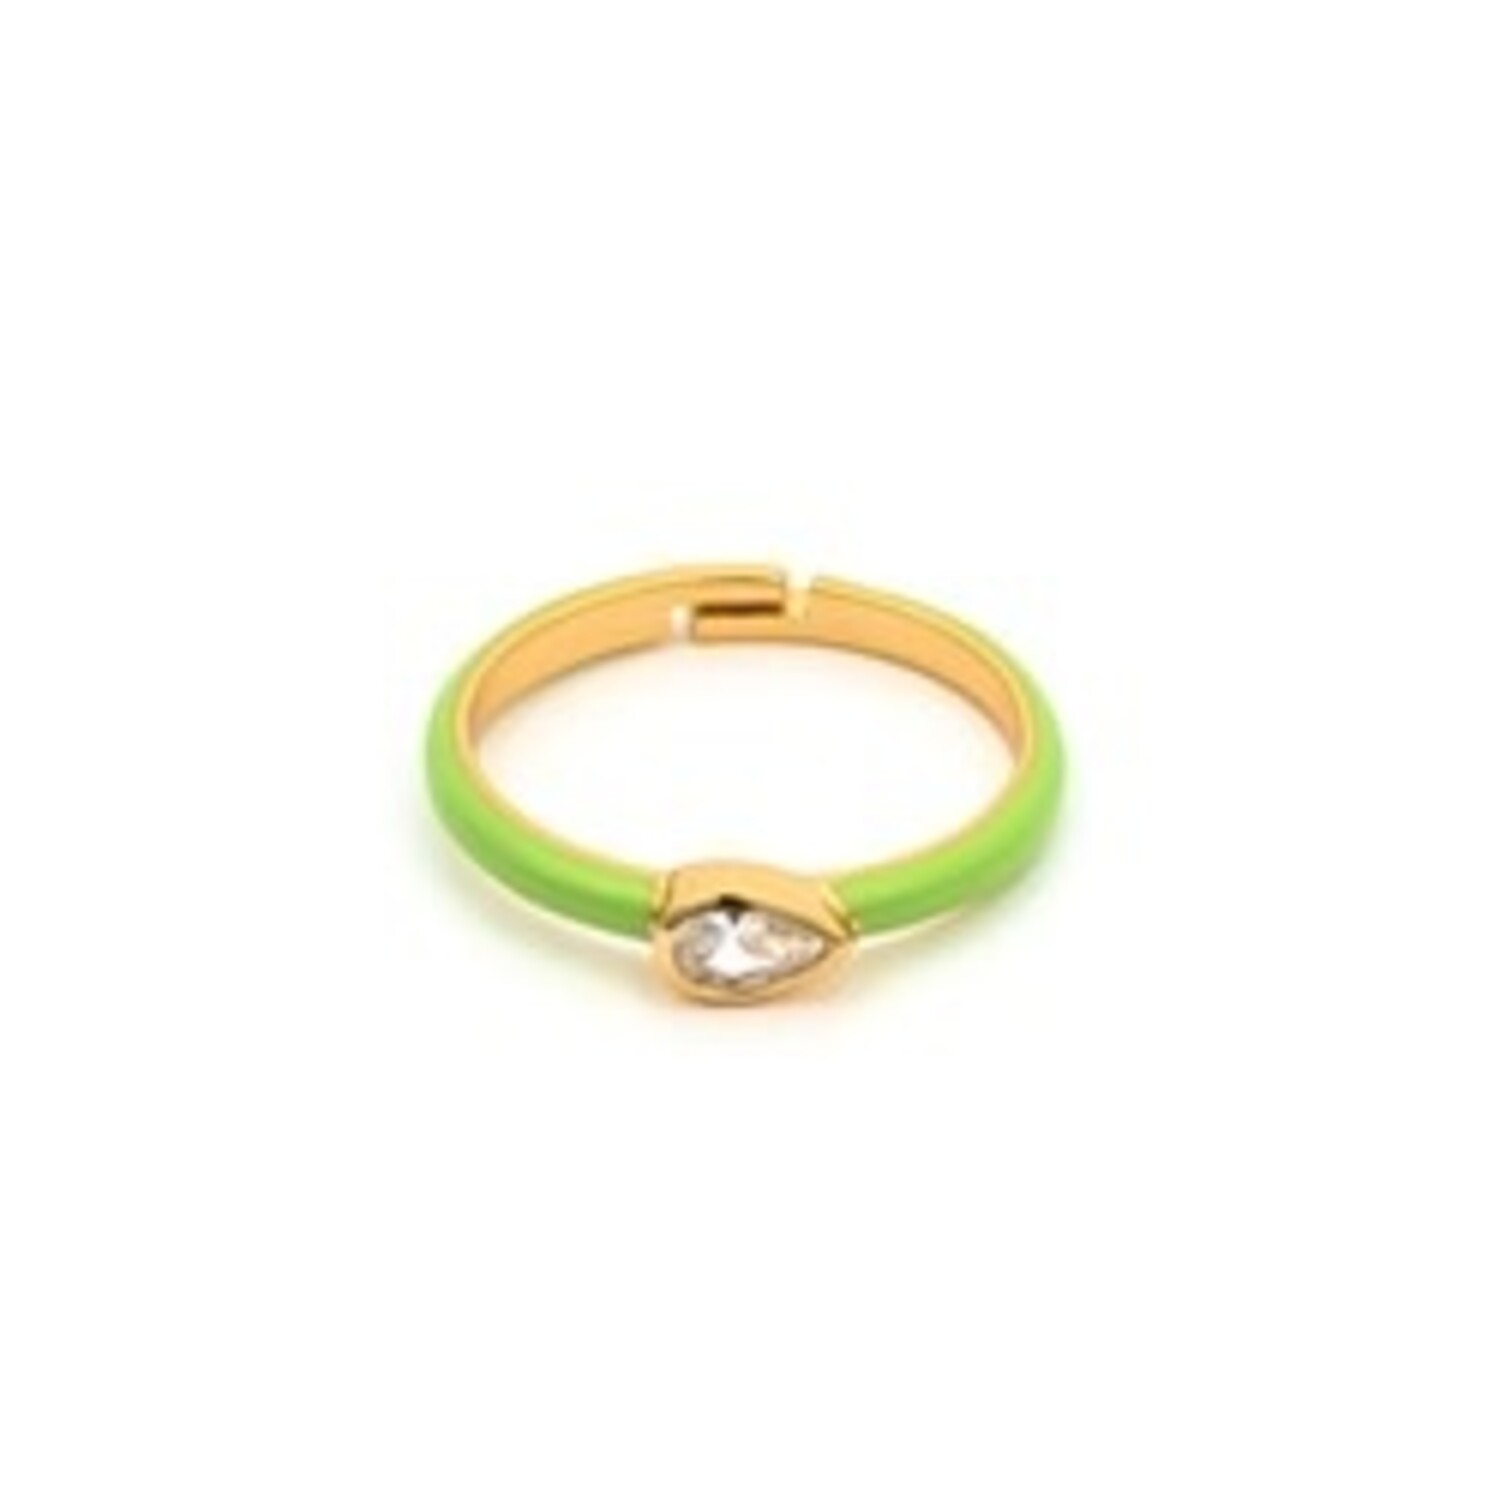 AND Company CAI Ring Marie COOL Glam Joyful - INTERESTING - Enamel and Amber